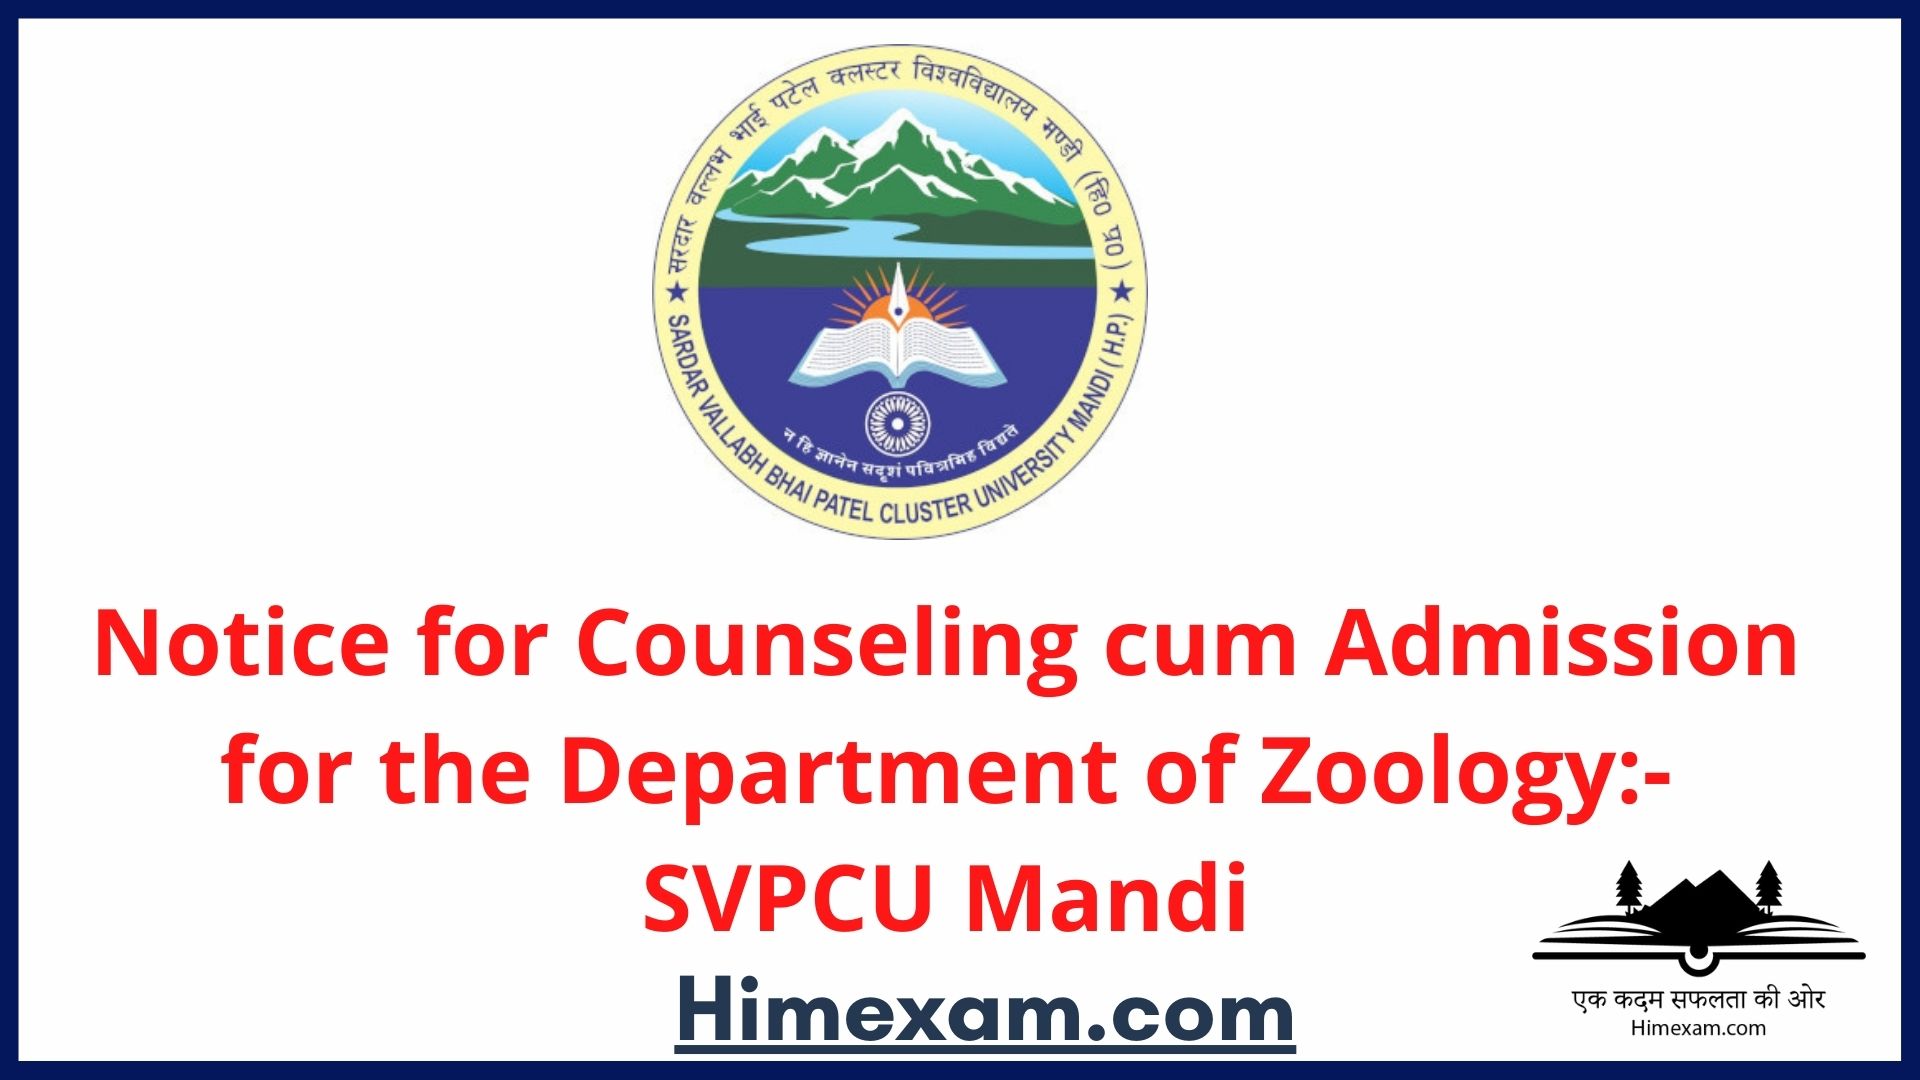 Notice for Counseling cum Admission for the Department of Zoology:- SVPCU Mandi